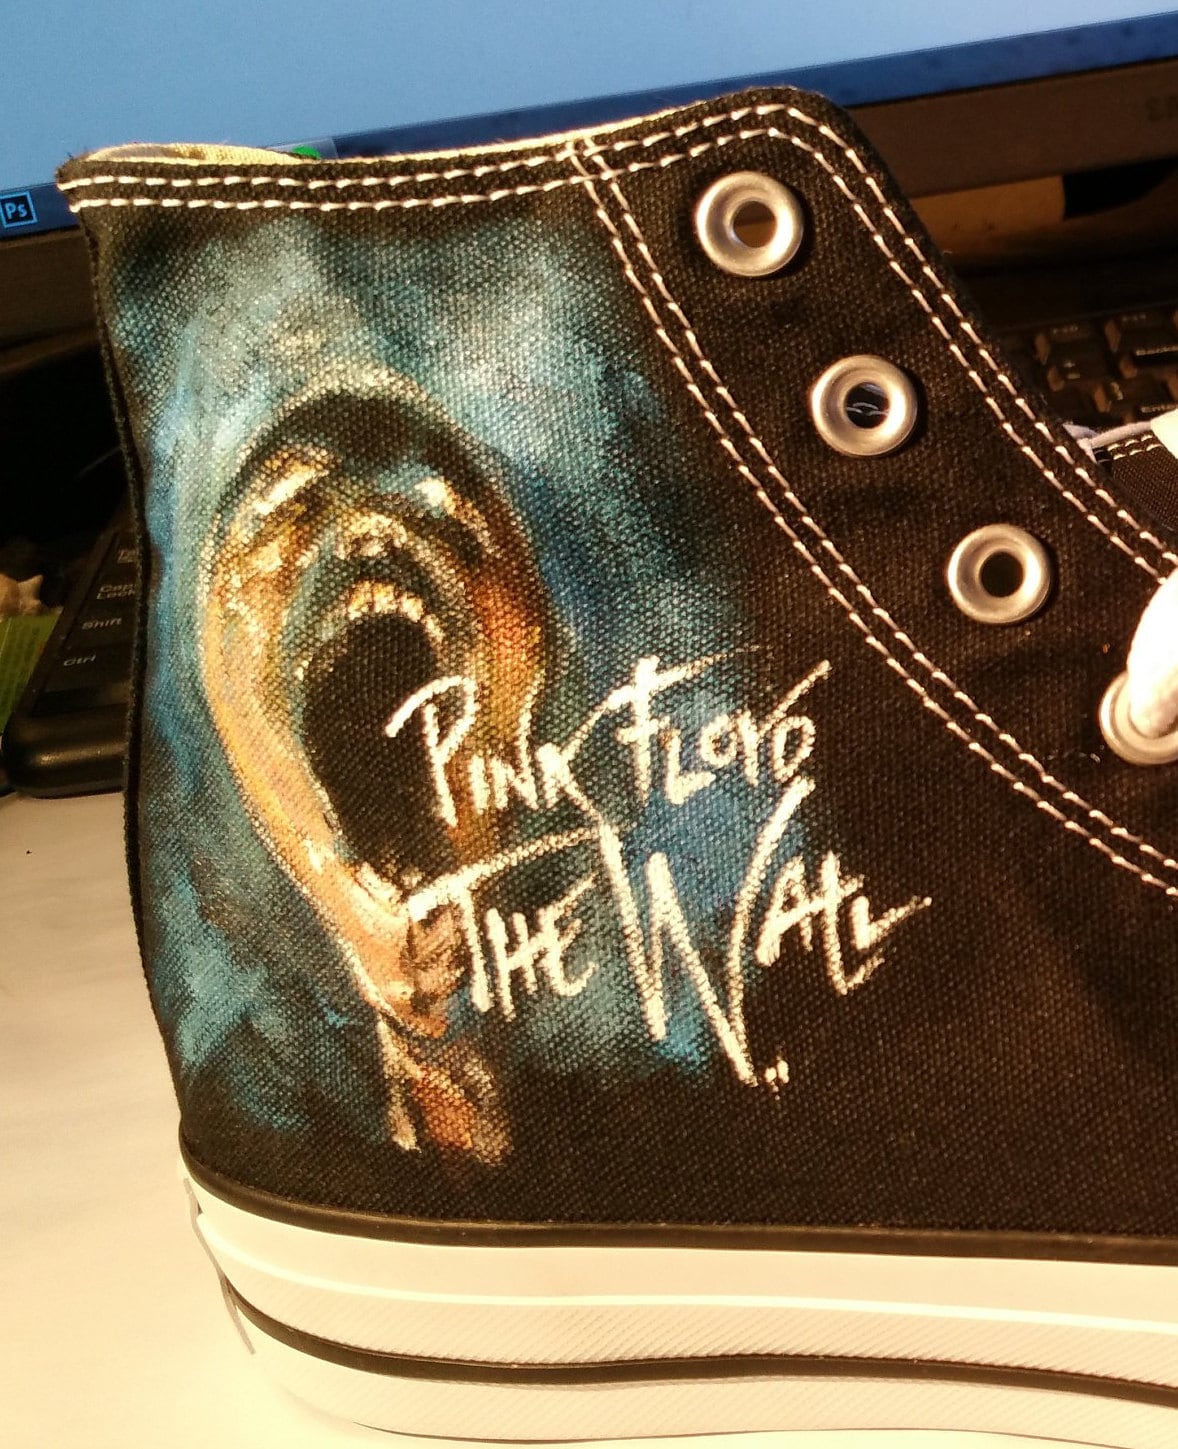 Pink Floyd Converse Shoes the Wall Dark of the Etsy